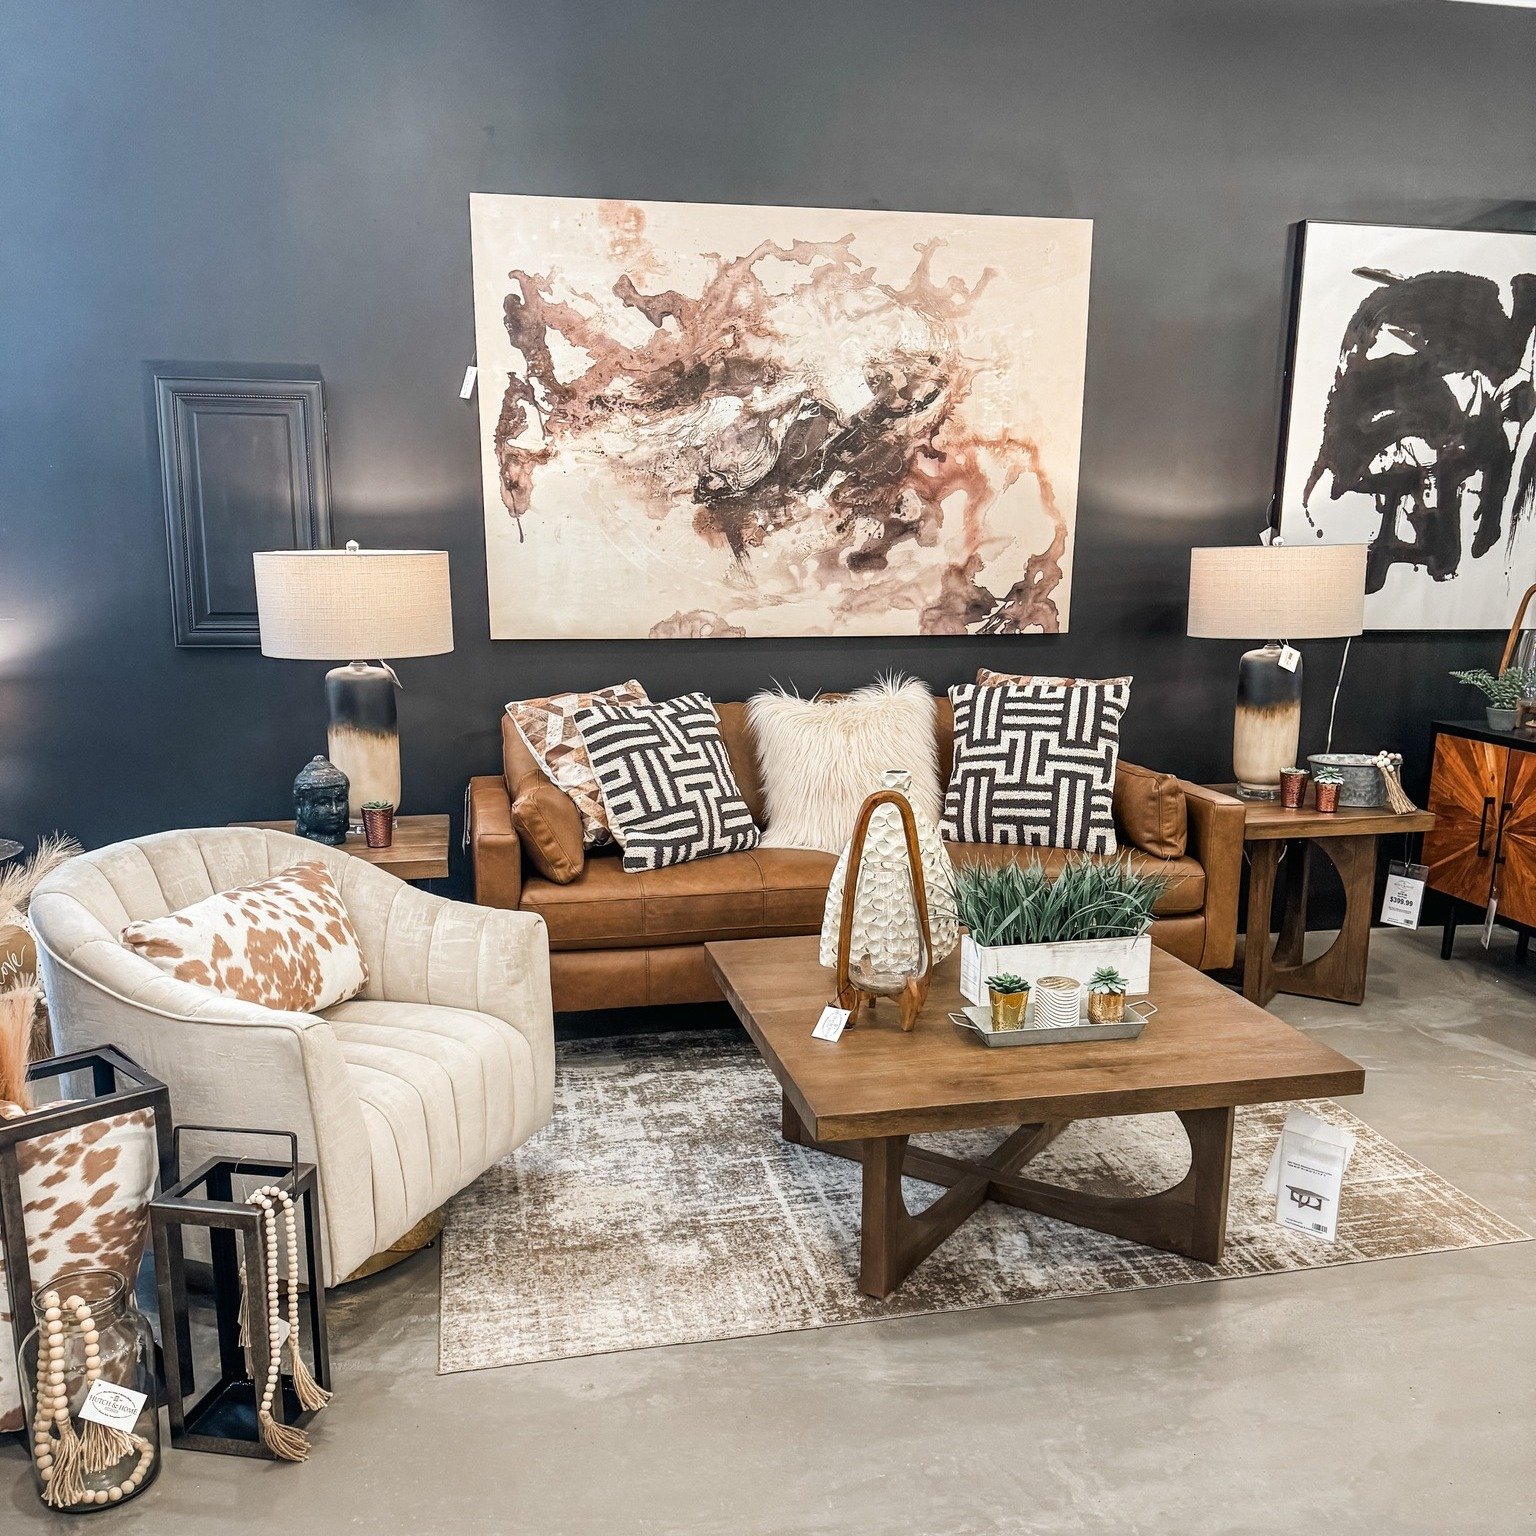 HOW CHIC IS THIS⁉️
Stop in today to shop our awesome accessories and customizable chairs and sofas! 

Hutch &amp; Home - Love Your Dwelling 🇺🇸
1224 7th Ave. - Beaver Falls, PA 
724-843-7375
.
Open Mon - Fri 10:00 - 5:00 &amp; Saturday 10:00 - 4:00
